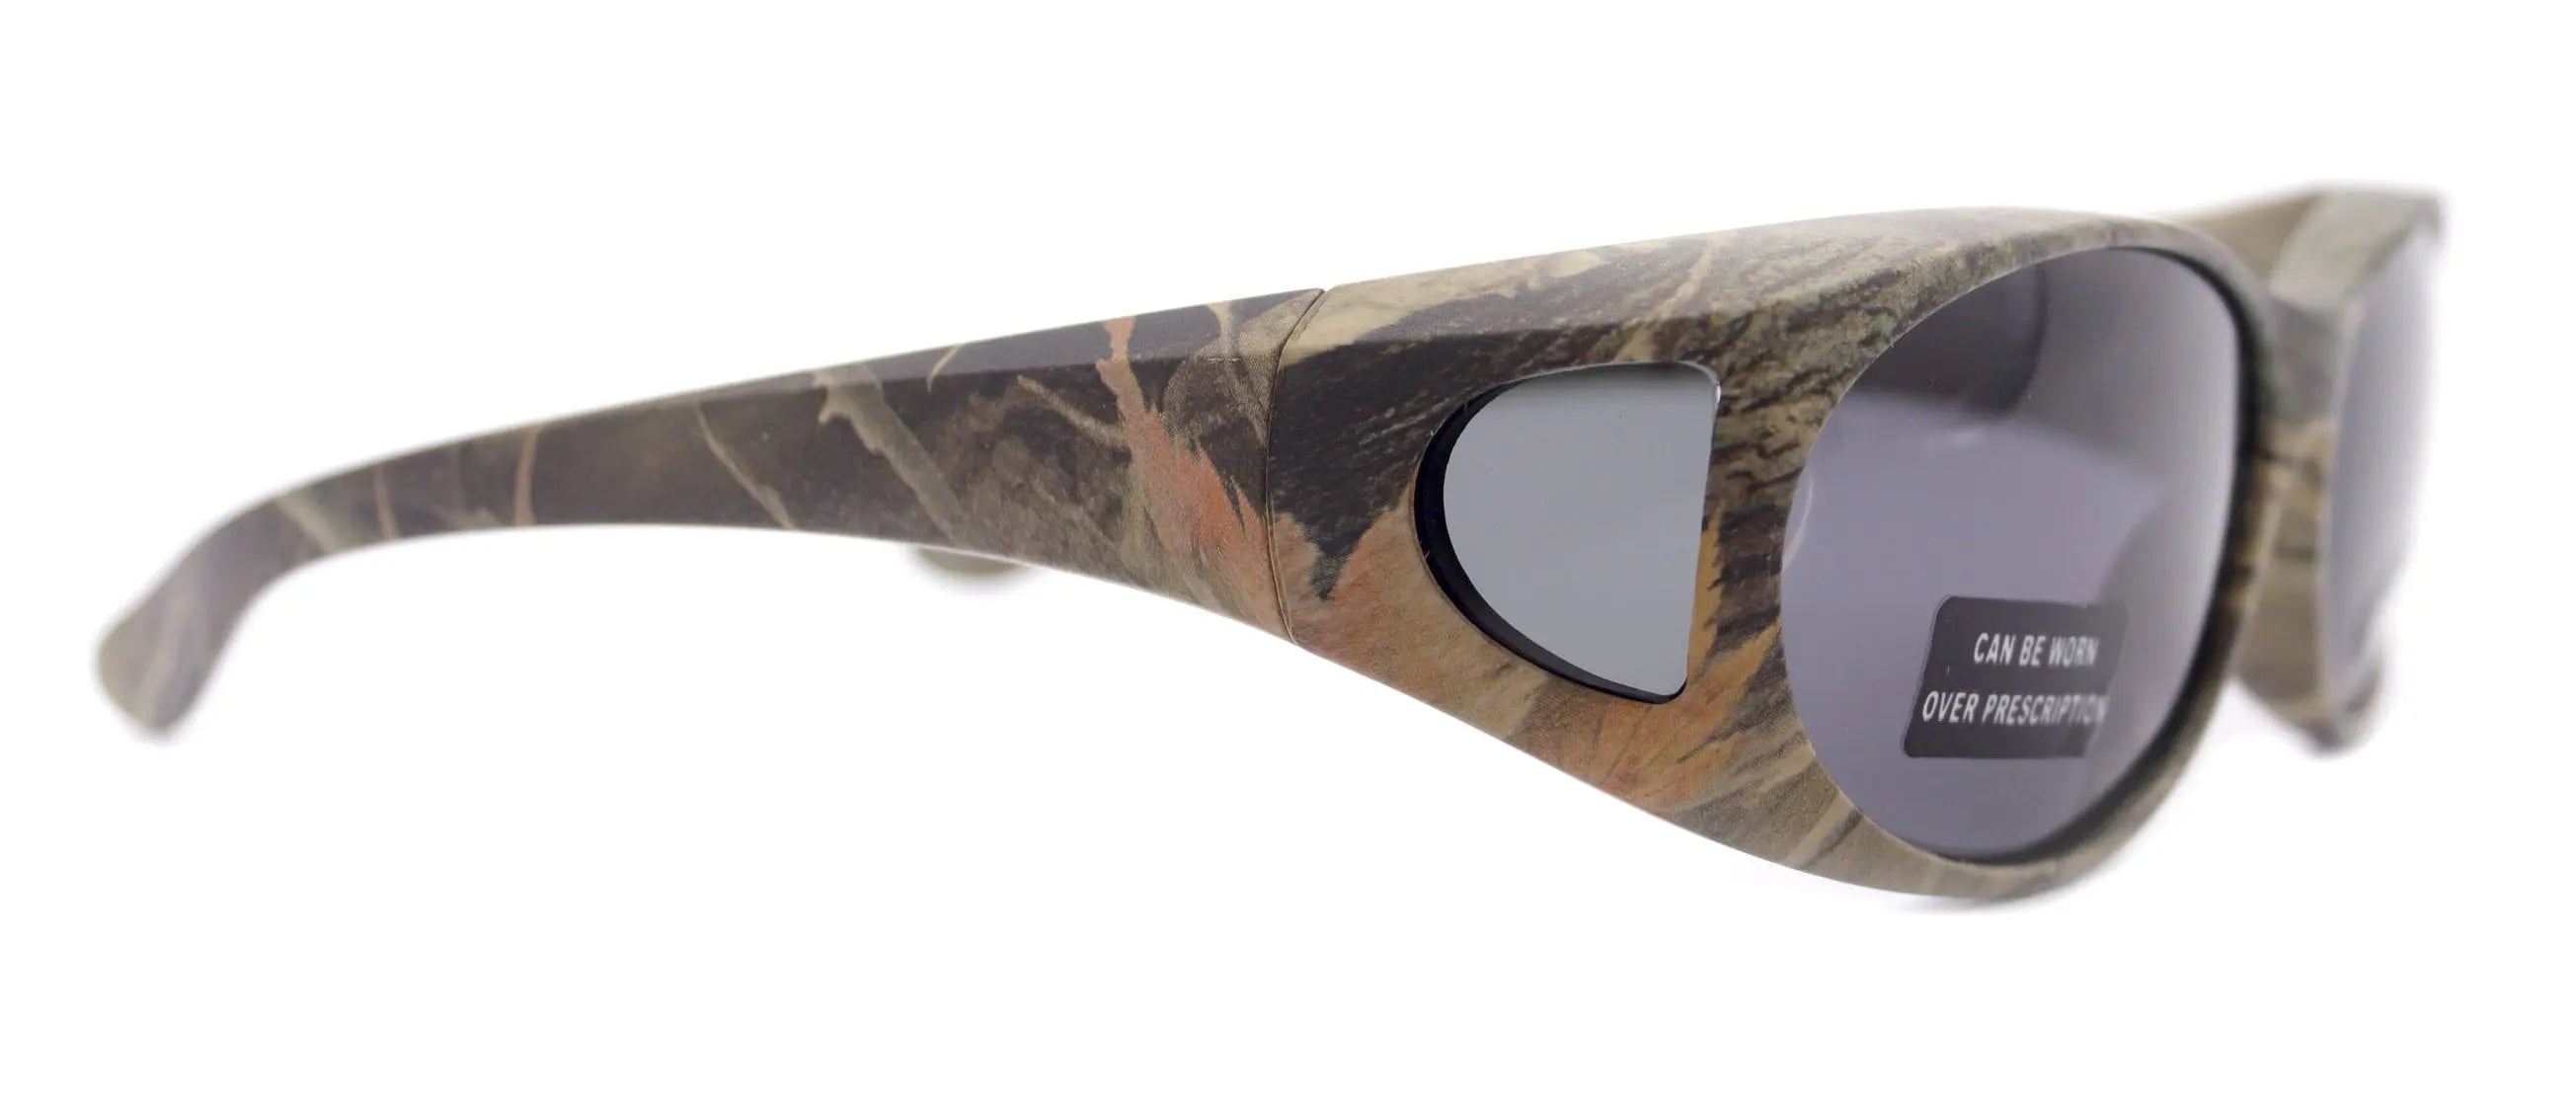 http://majesticeyewear.com/cdn/shop/products/Silva_-_Fit-Over_-Glasses_-Rectangular-Polarized-Sunglasses-1.1mm-100_-UV-Protection-_Green-Camo_-Great-Out-Door-Fishing--NY-Fifth-Avenue-NY-Fifth-Avenue-1650473453.jpg?v=1650558635